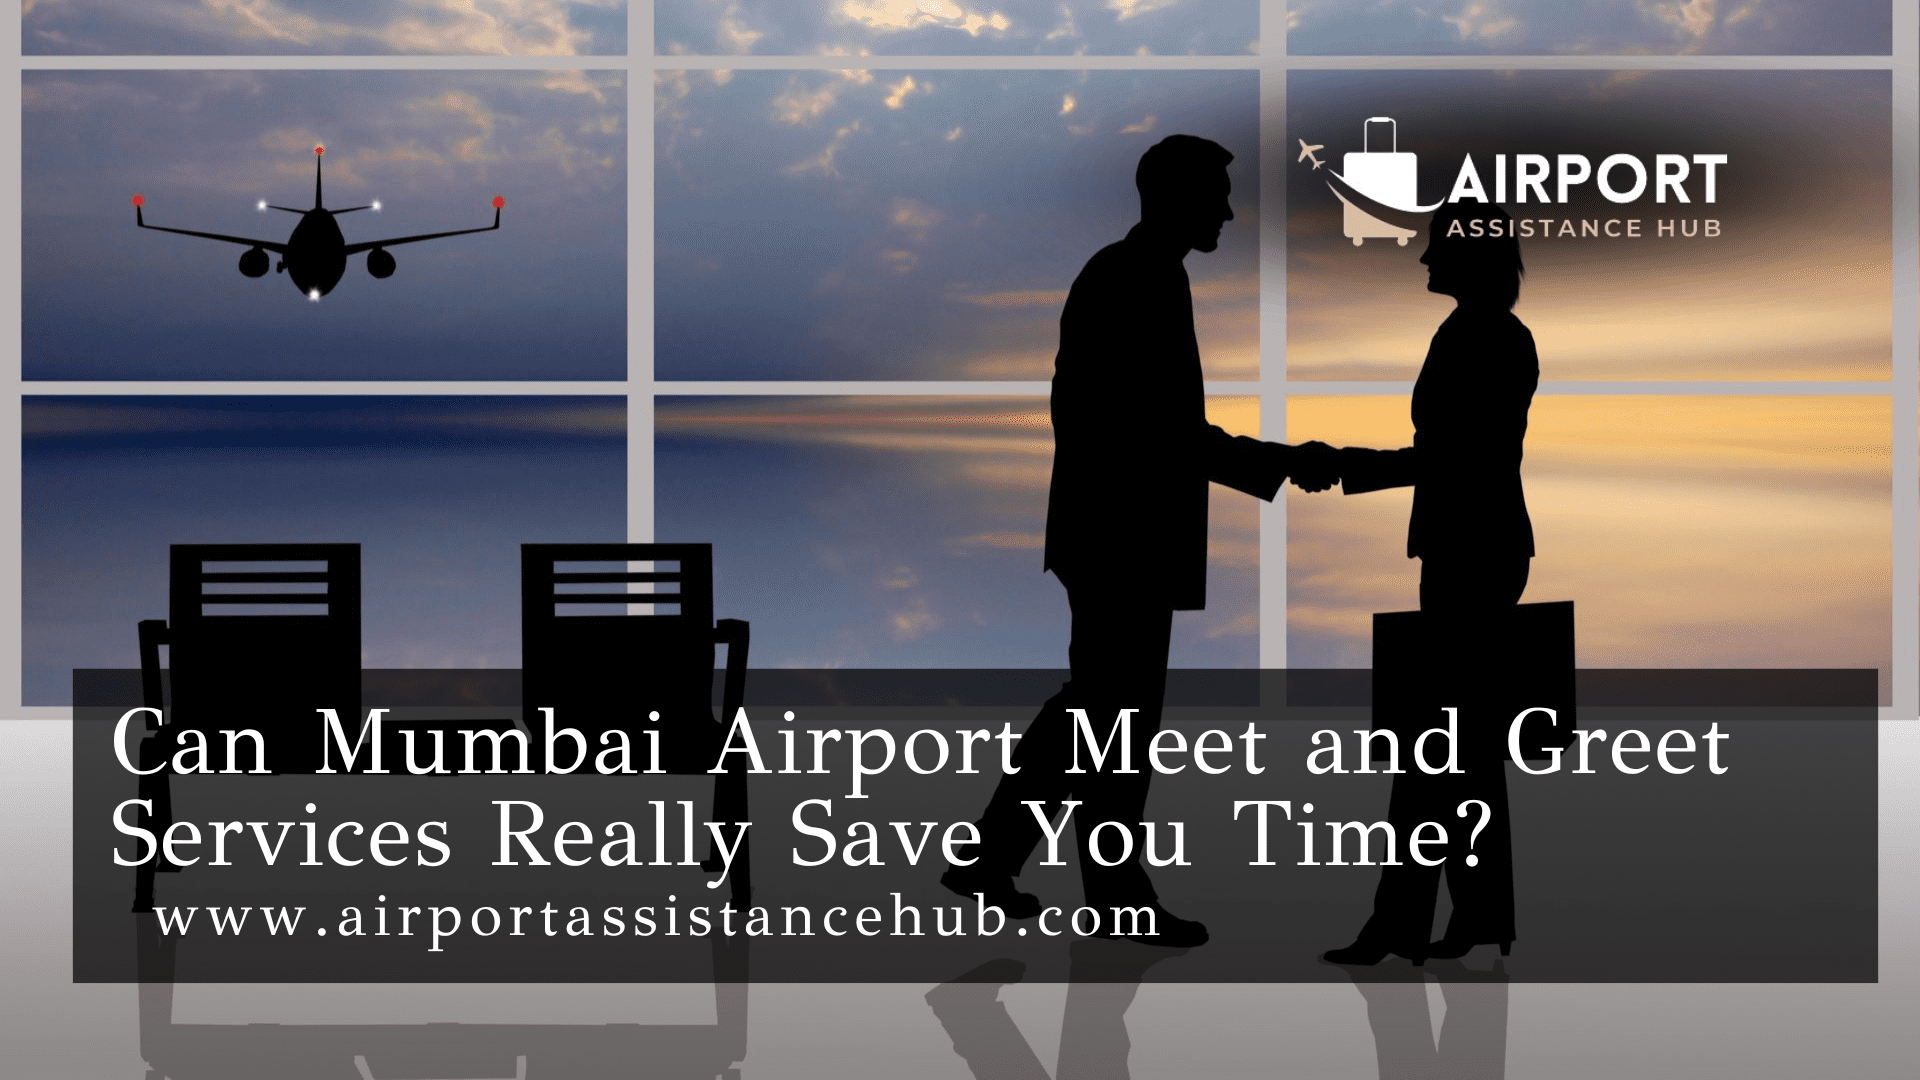 Can Mumbai Airport Meet and Greet Services Really Save You Time?